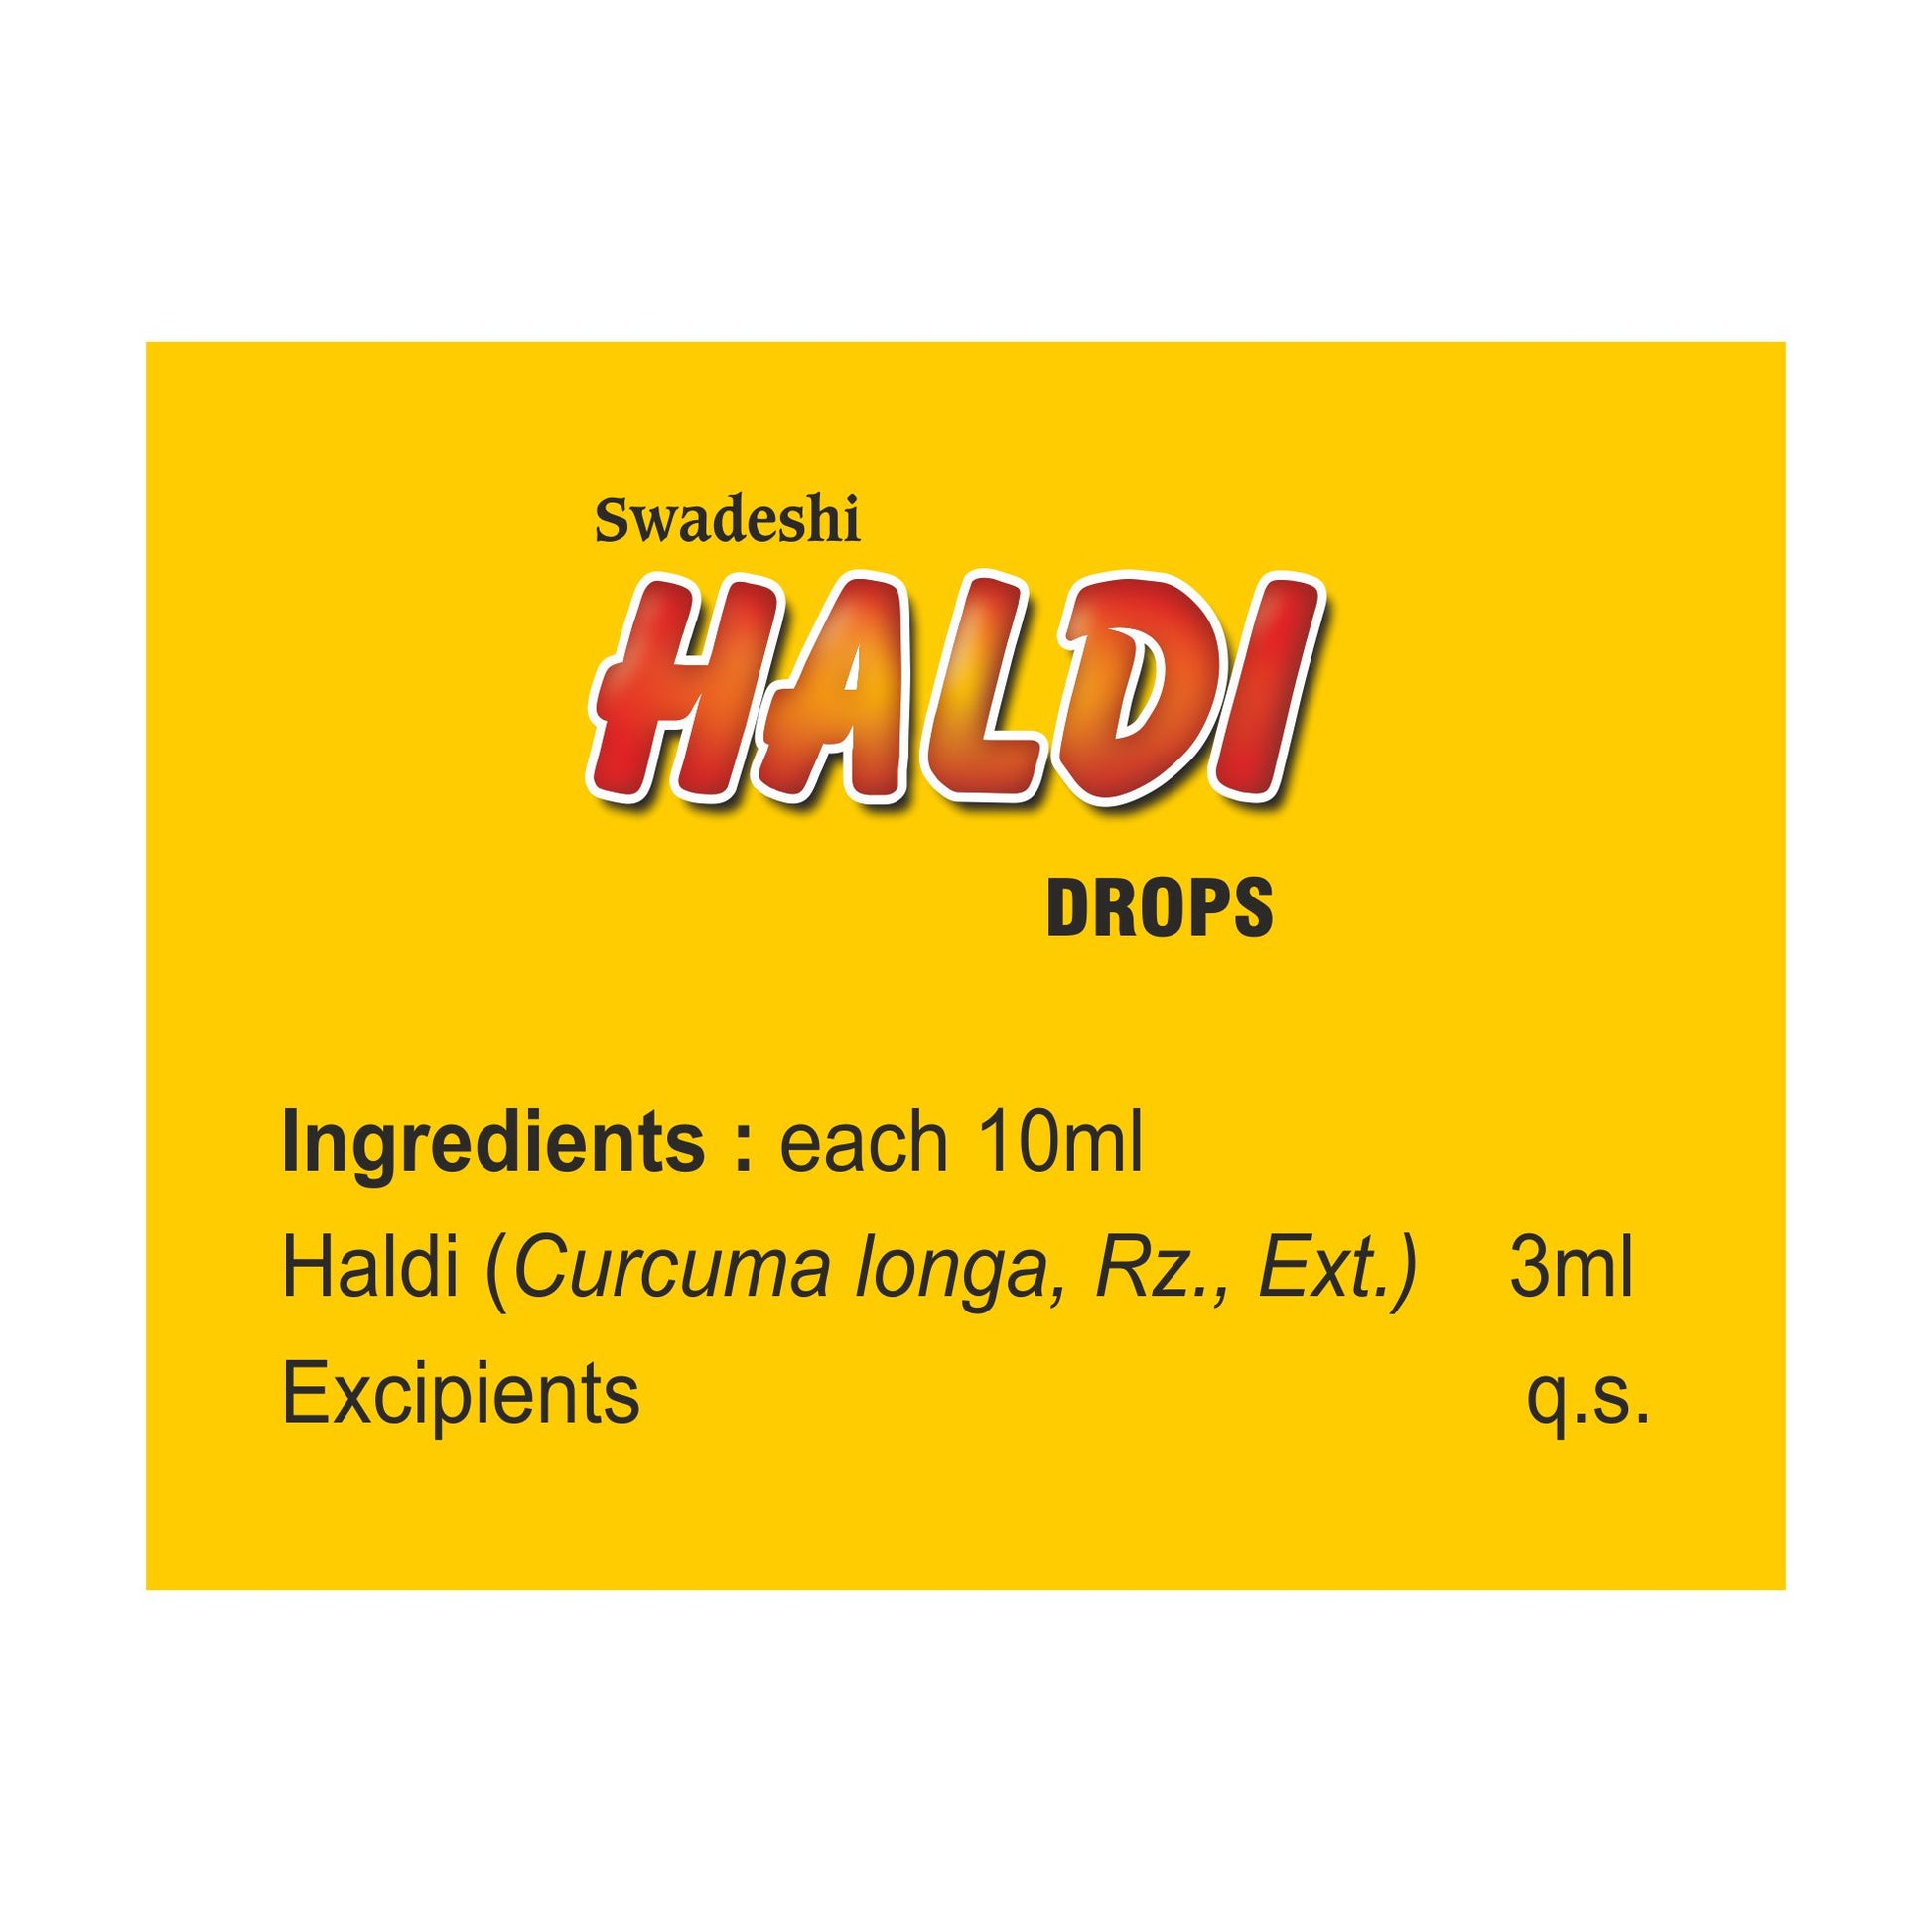 Step-by-step guide showing how to use Swadeshi Haldi Drop with a dropper. Recommended dosage is 5-10 drops twice a day or as directed by a physician.